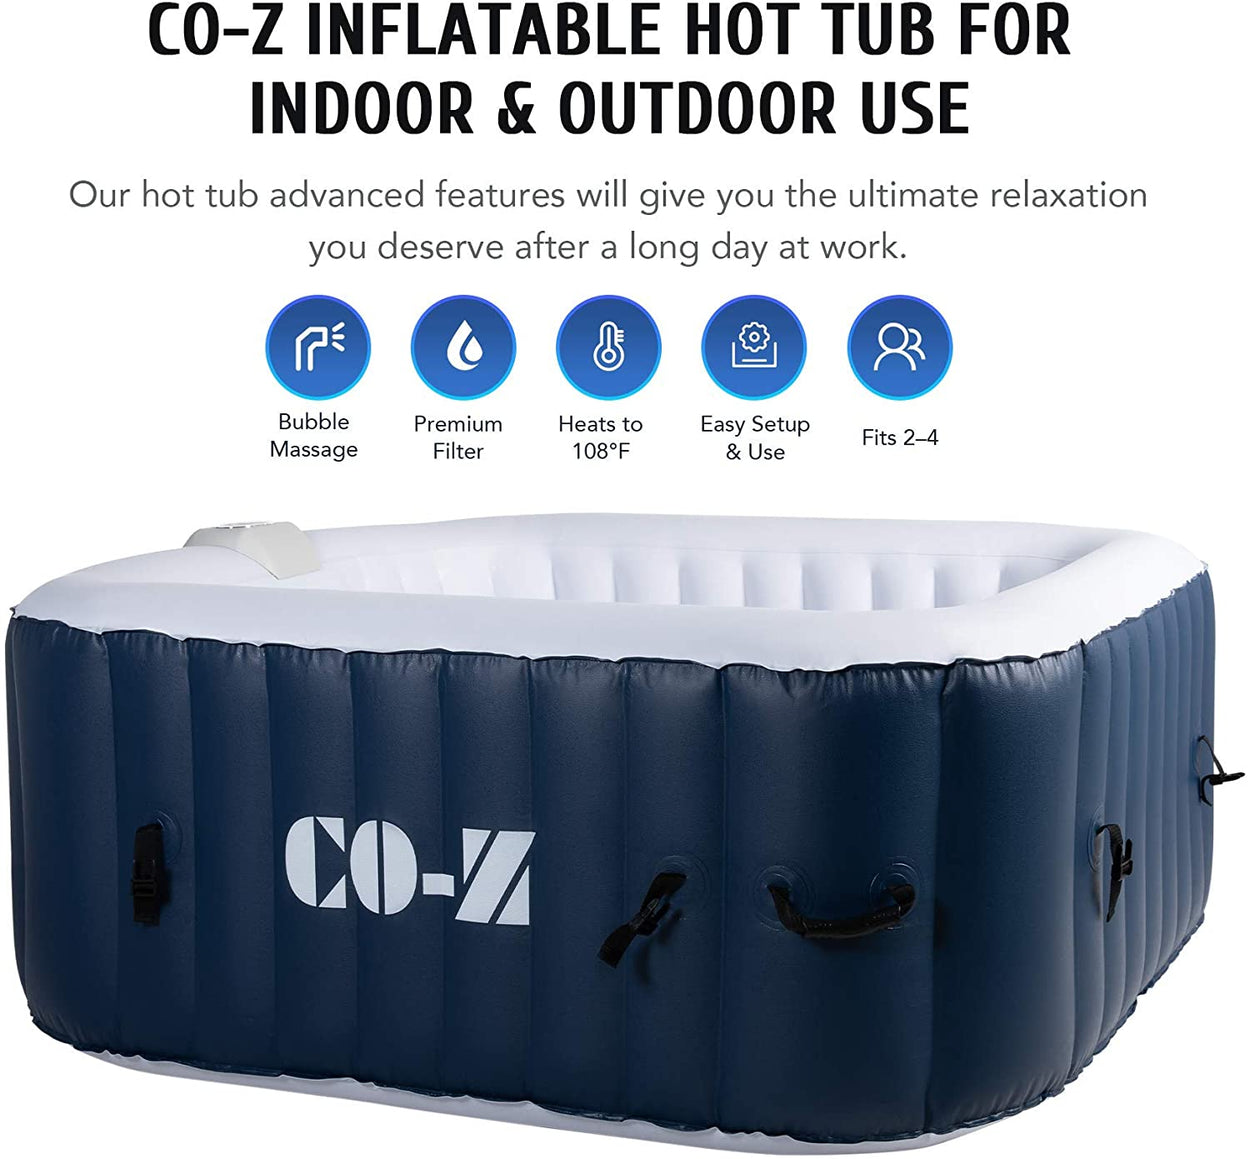 CO-Z 158 gal 4 person inflatable hot tub